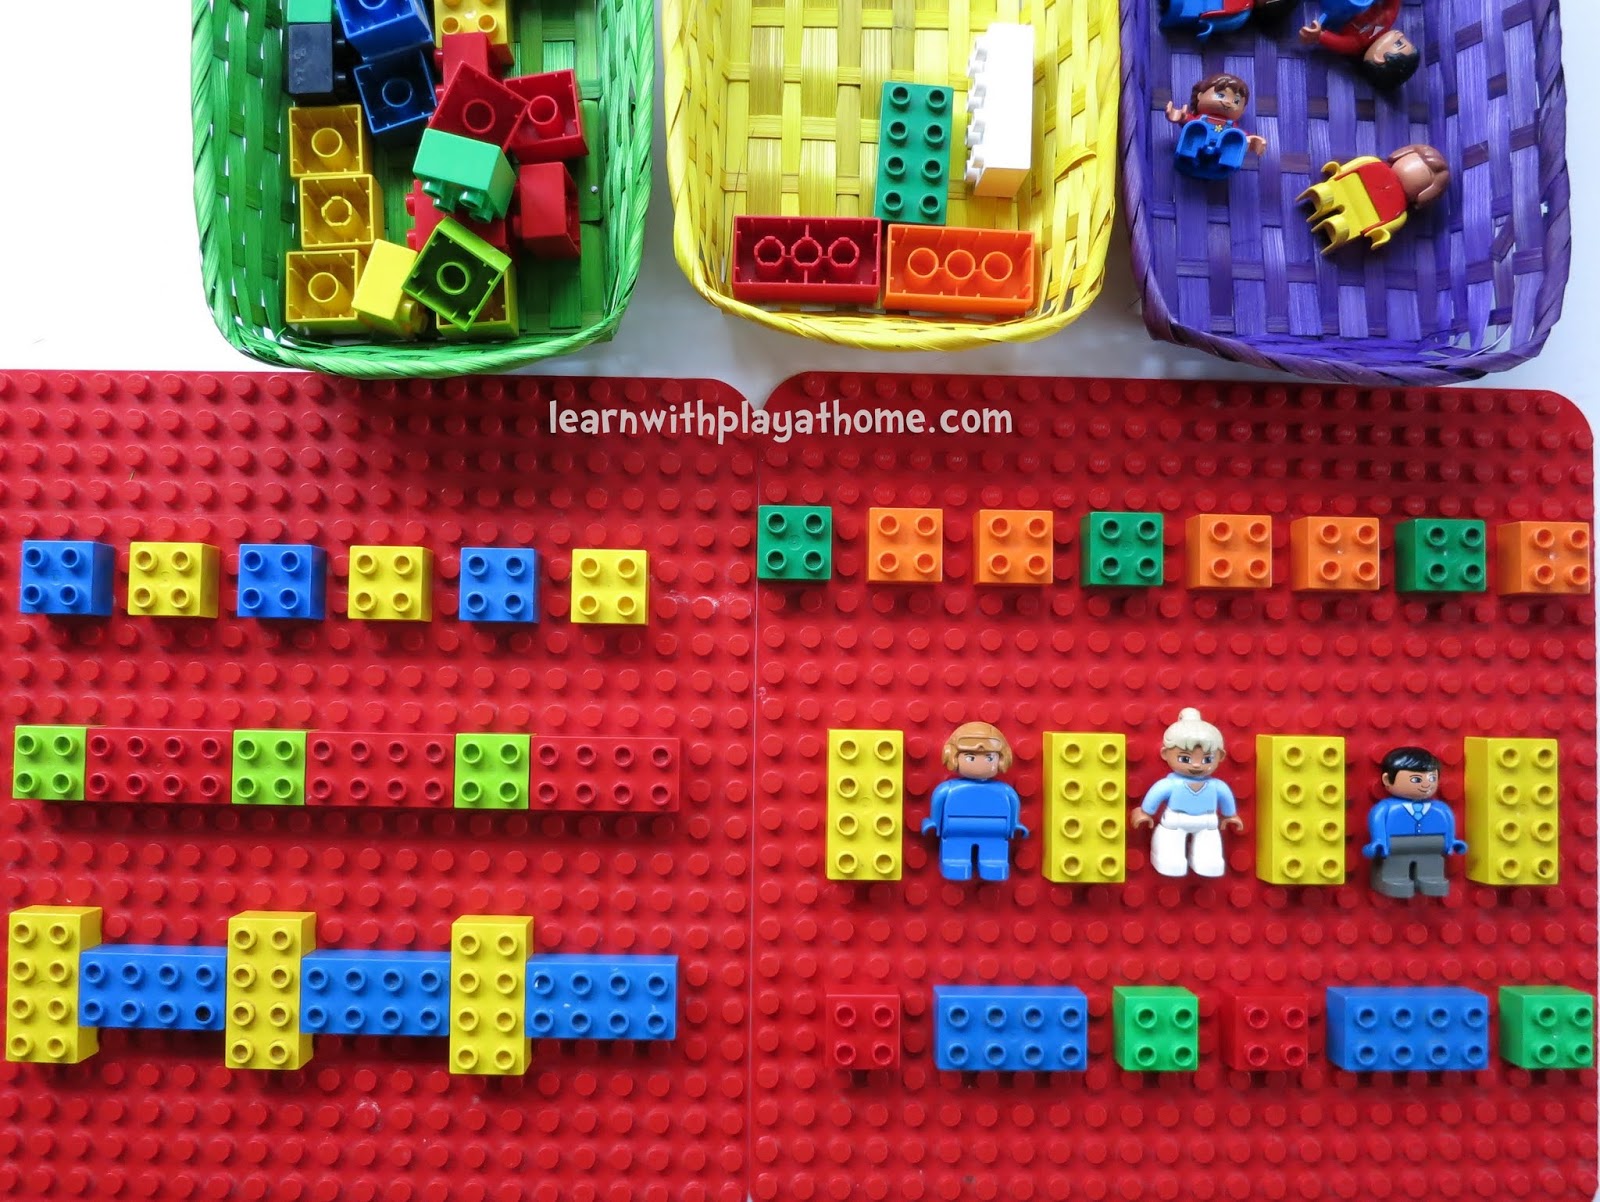 pouch Med vilje Luske Learn with Play at Home: Learning Patterns with Lego